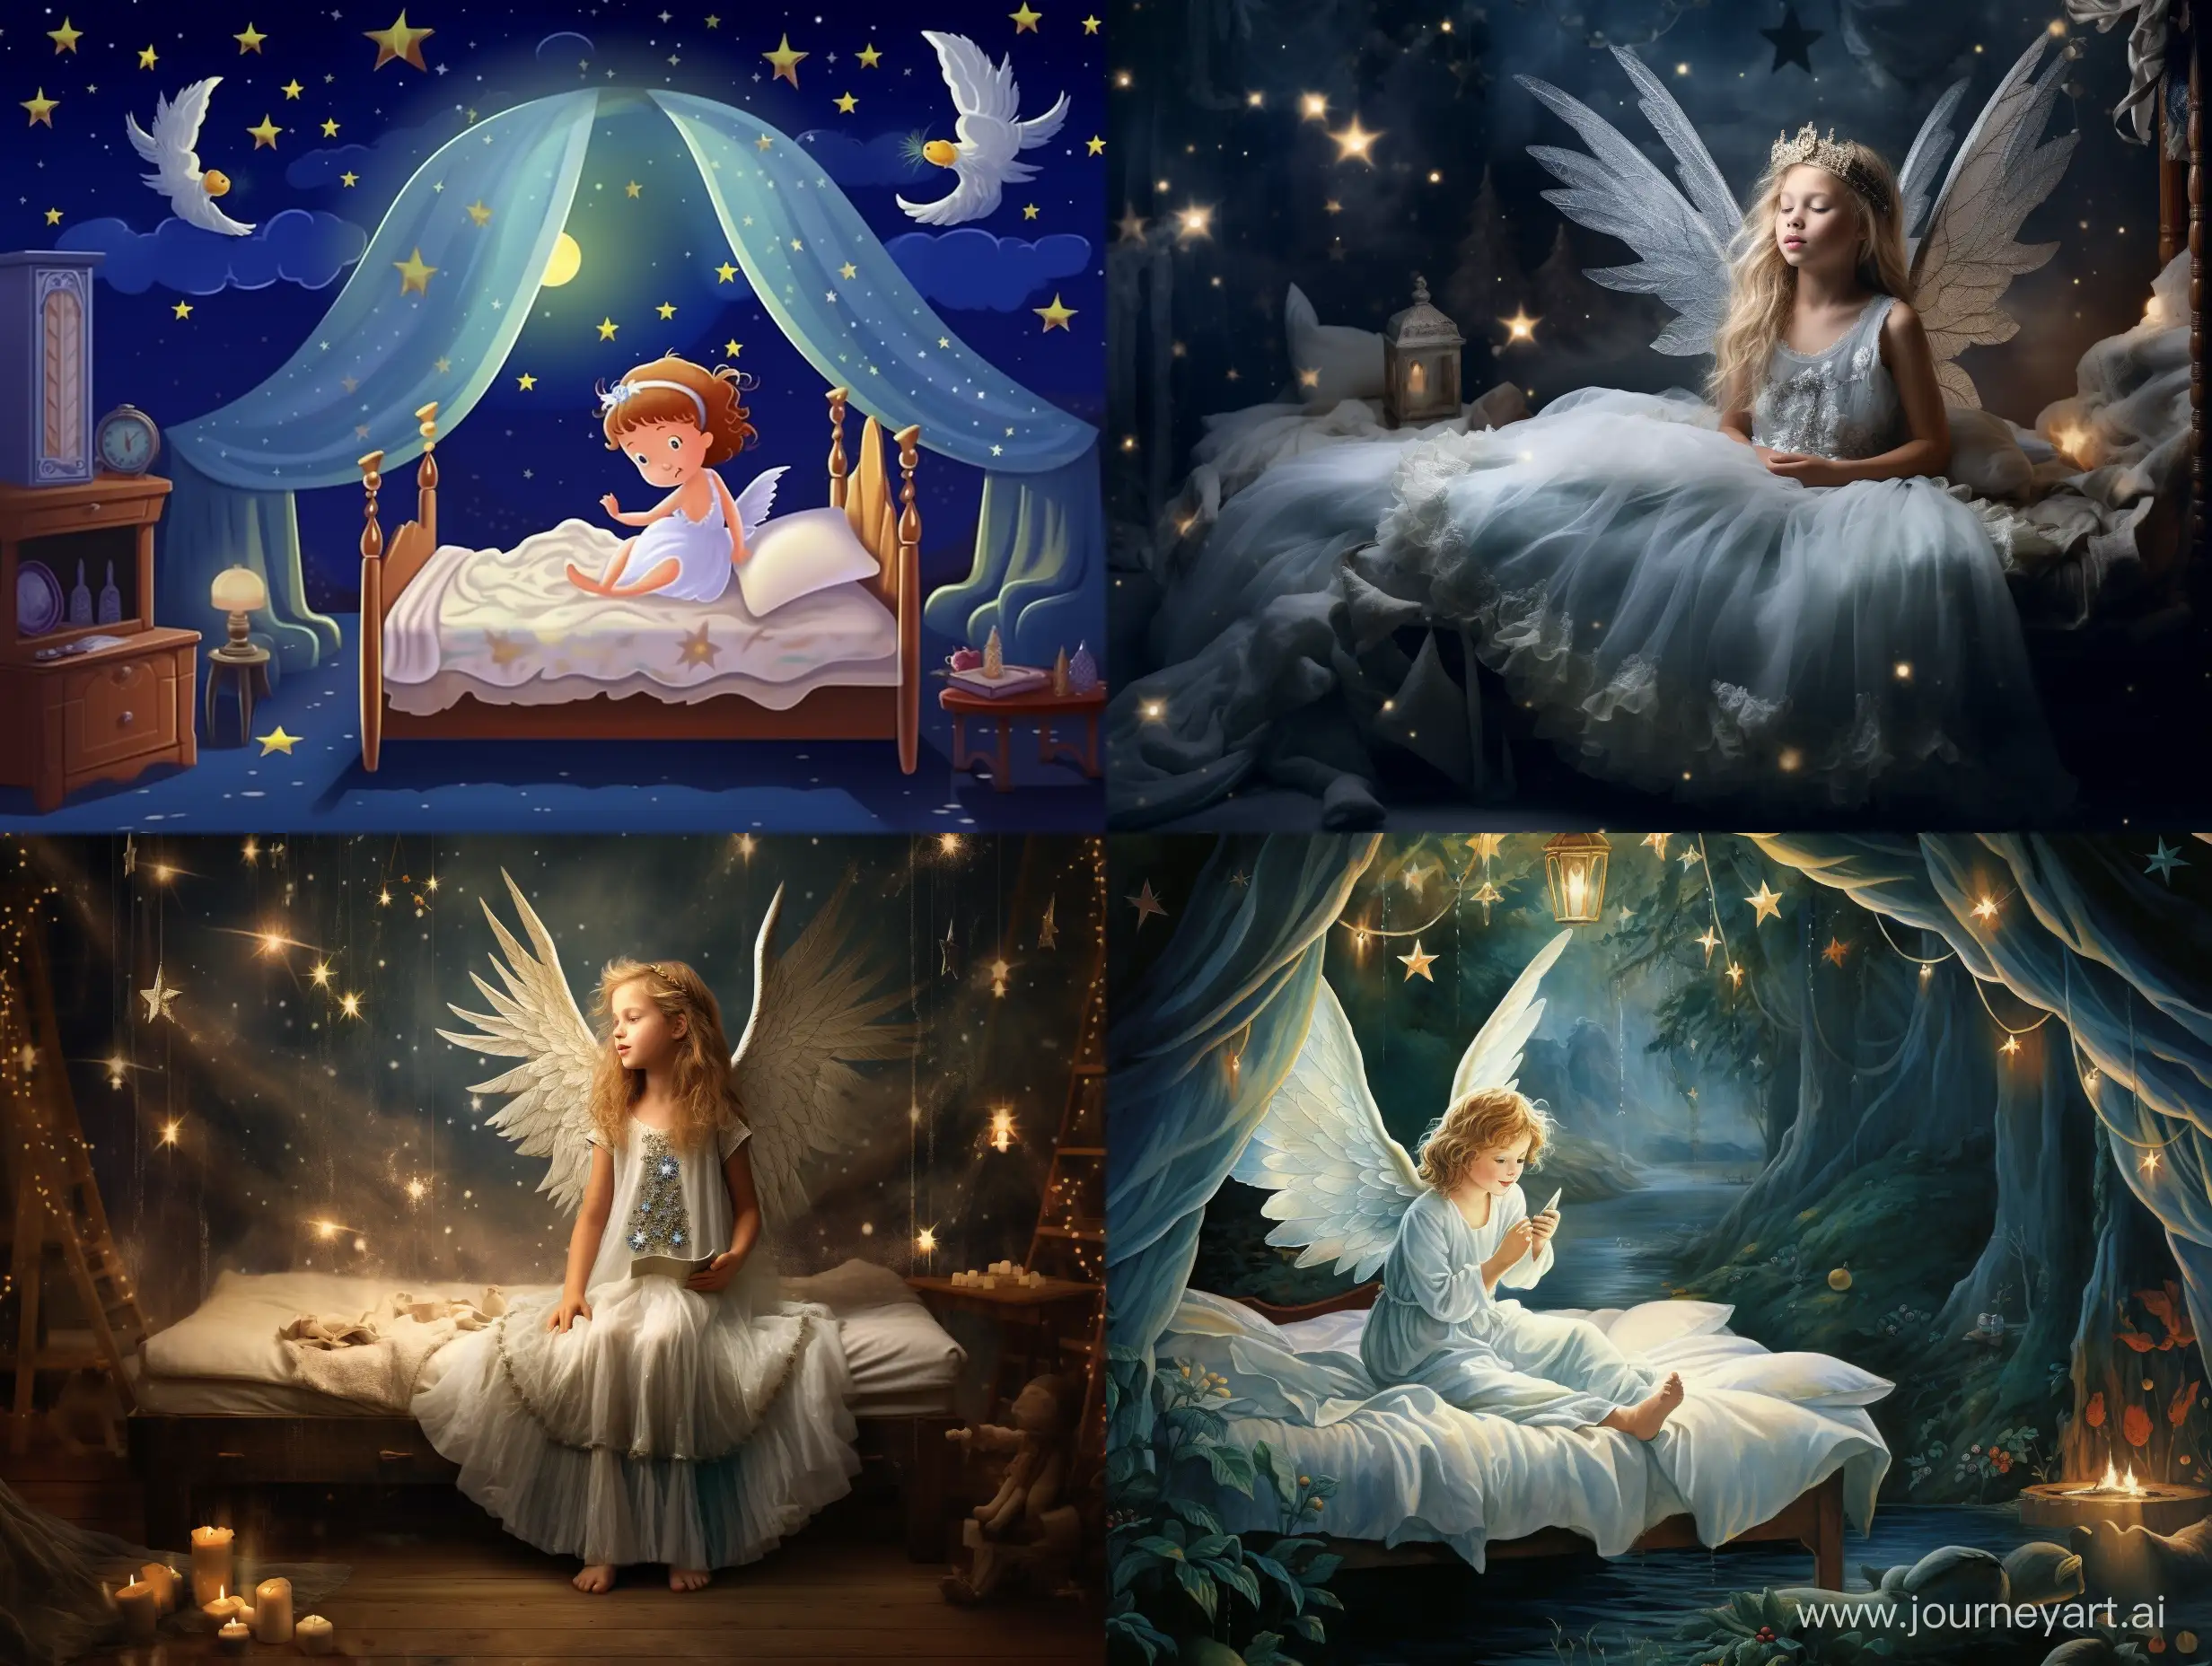  Visualize a scene where an ethereal tooth fairy, donned in vibrantly colored garments, is gently flitting into a child's room in the middle of the night. The room is steeped in soft moonlight, illuminating the peacefully sleeping White, female child. The bedding and surrounding decoration adding a warmth to the room are an intricate part of this image. The tooth fairy, a Middle-Eastern female, holds a tiny glistening bag meant for exchanging the child's lost tooth with a small treasure. The gentle, magical aura of the tooth fairy offers a beautiful juxtaposition against the calm and snug ambiance of the room.